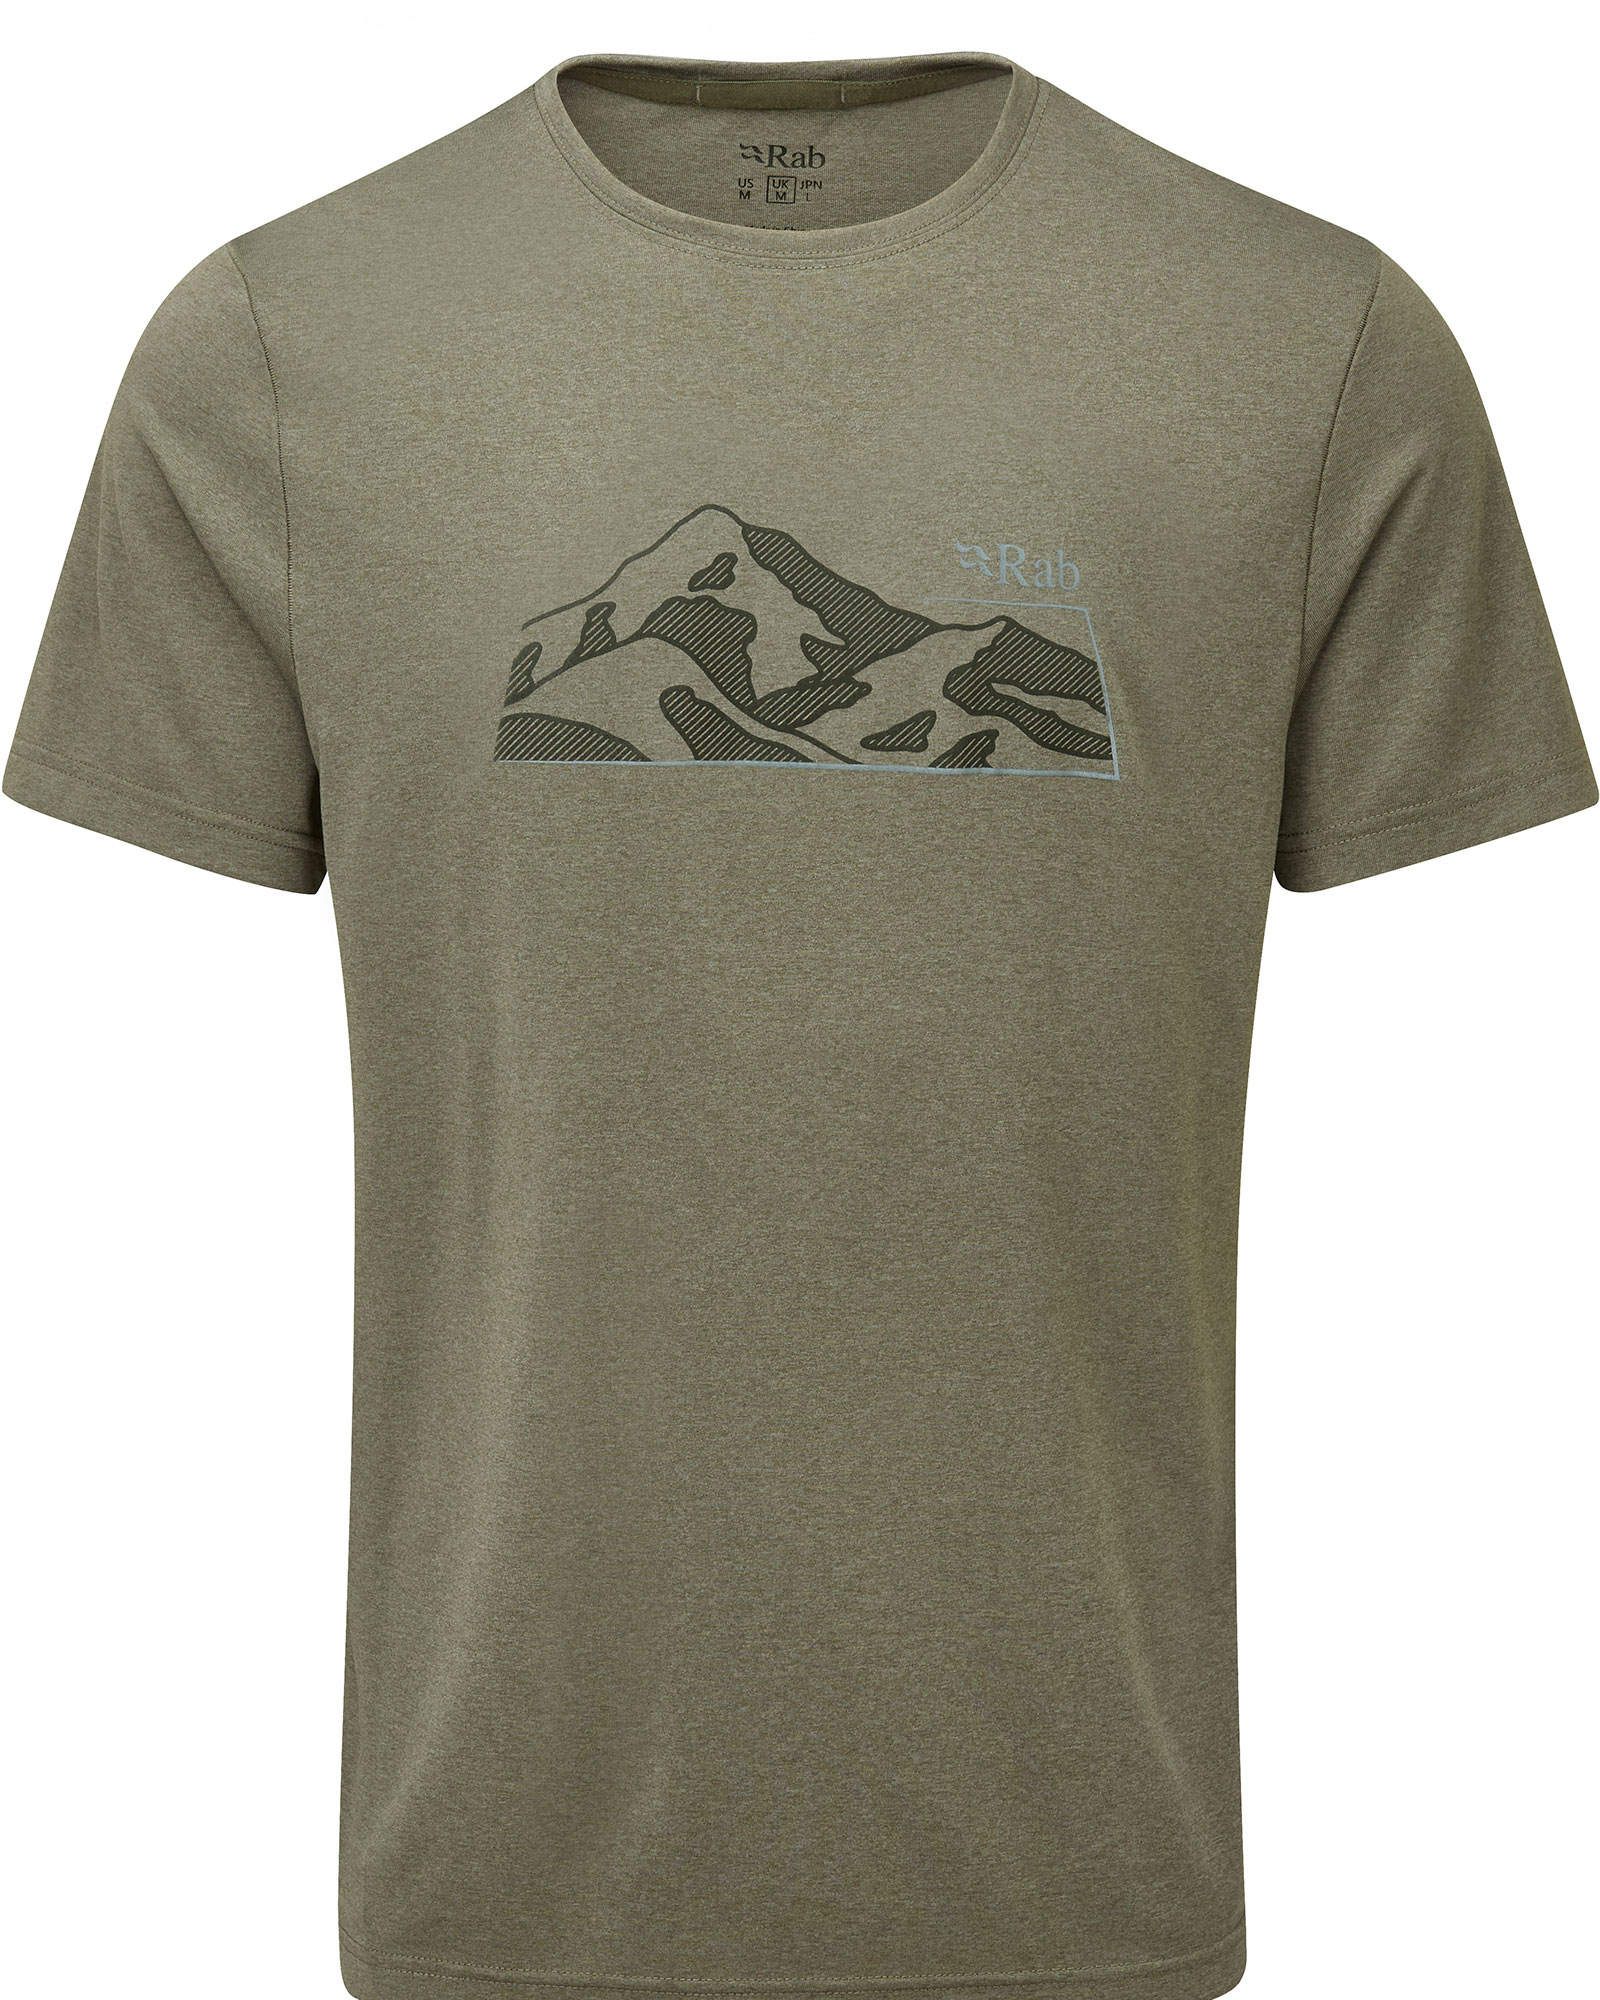 Product image of Rab Mantle Mountain Men's T-Shirt